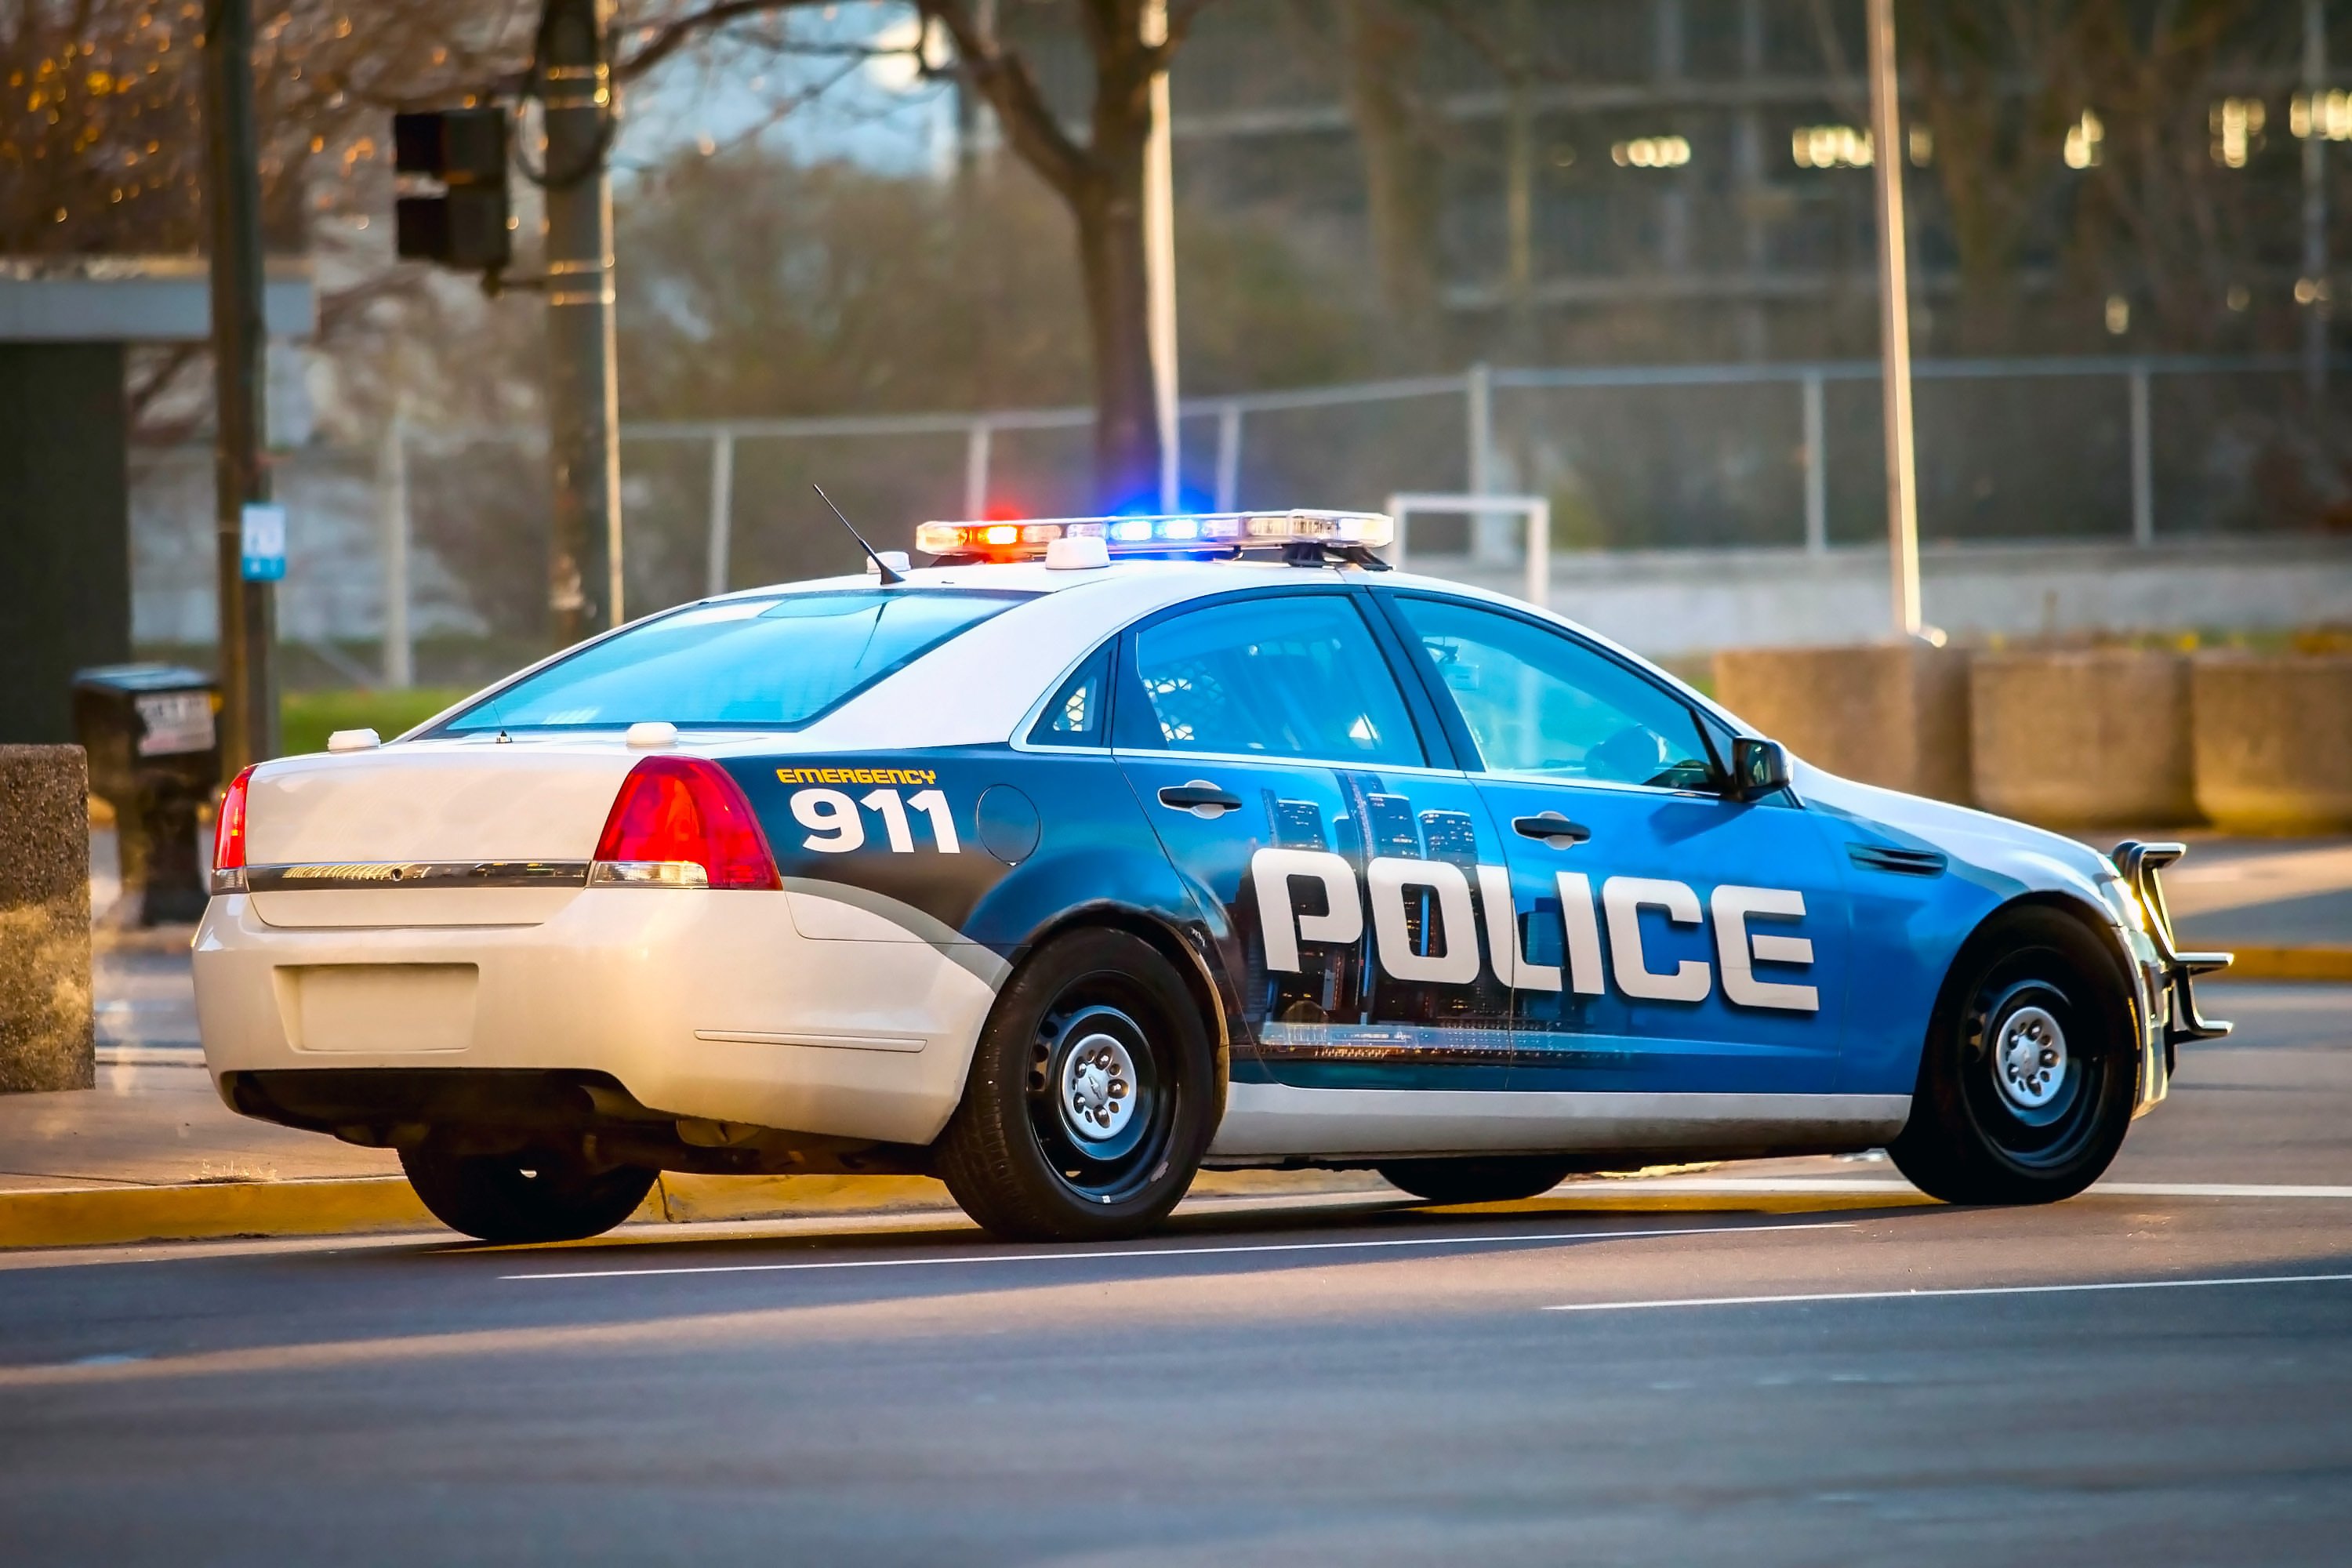 A police car pictured in a neighborhood street. | Photo: Shutterstock